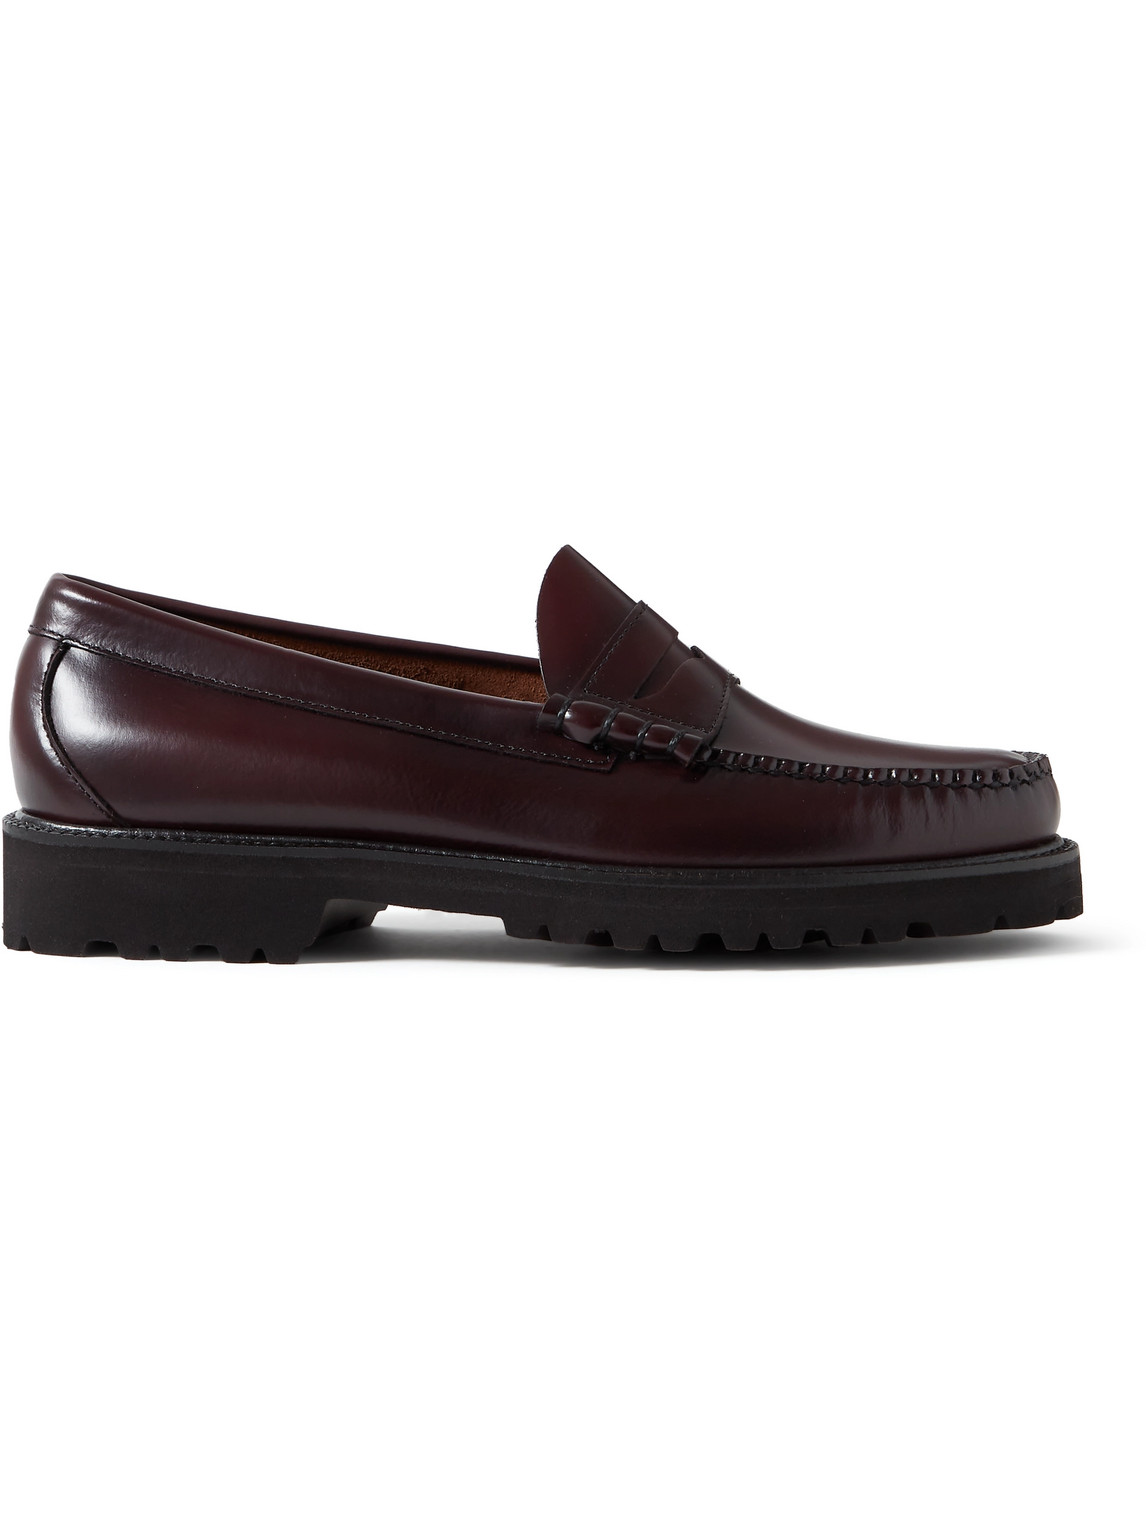 G.H. Bass & Co. - Weejuns 90 Larson Leather Penny Loafers - Men - Burgundy - UK 11 von G.H. Bass & Co.